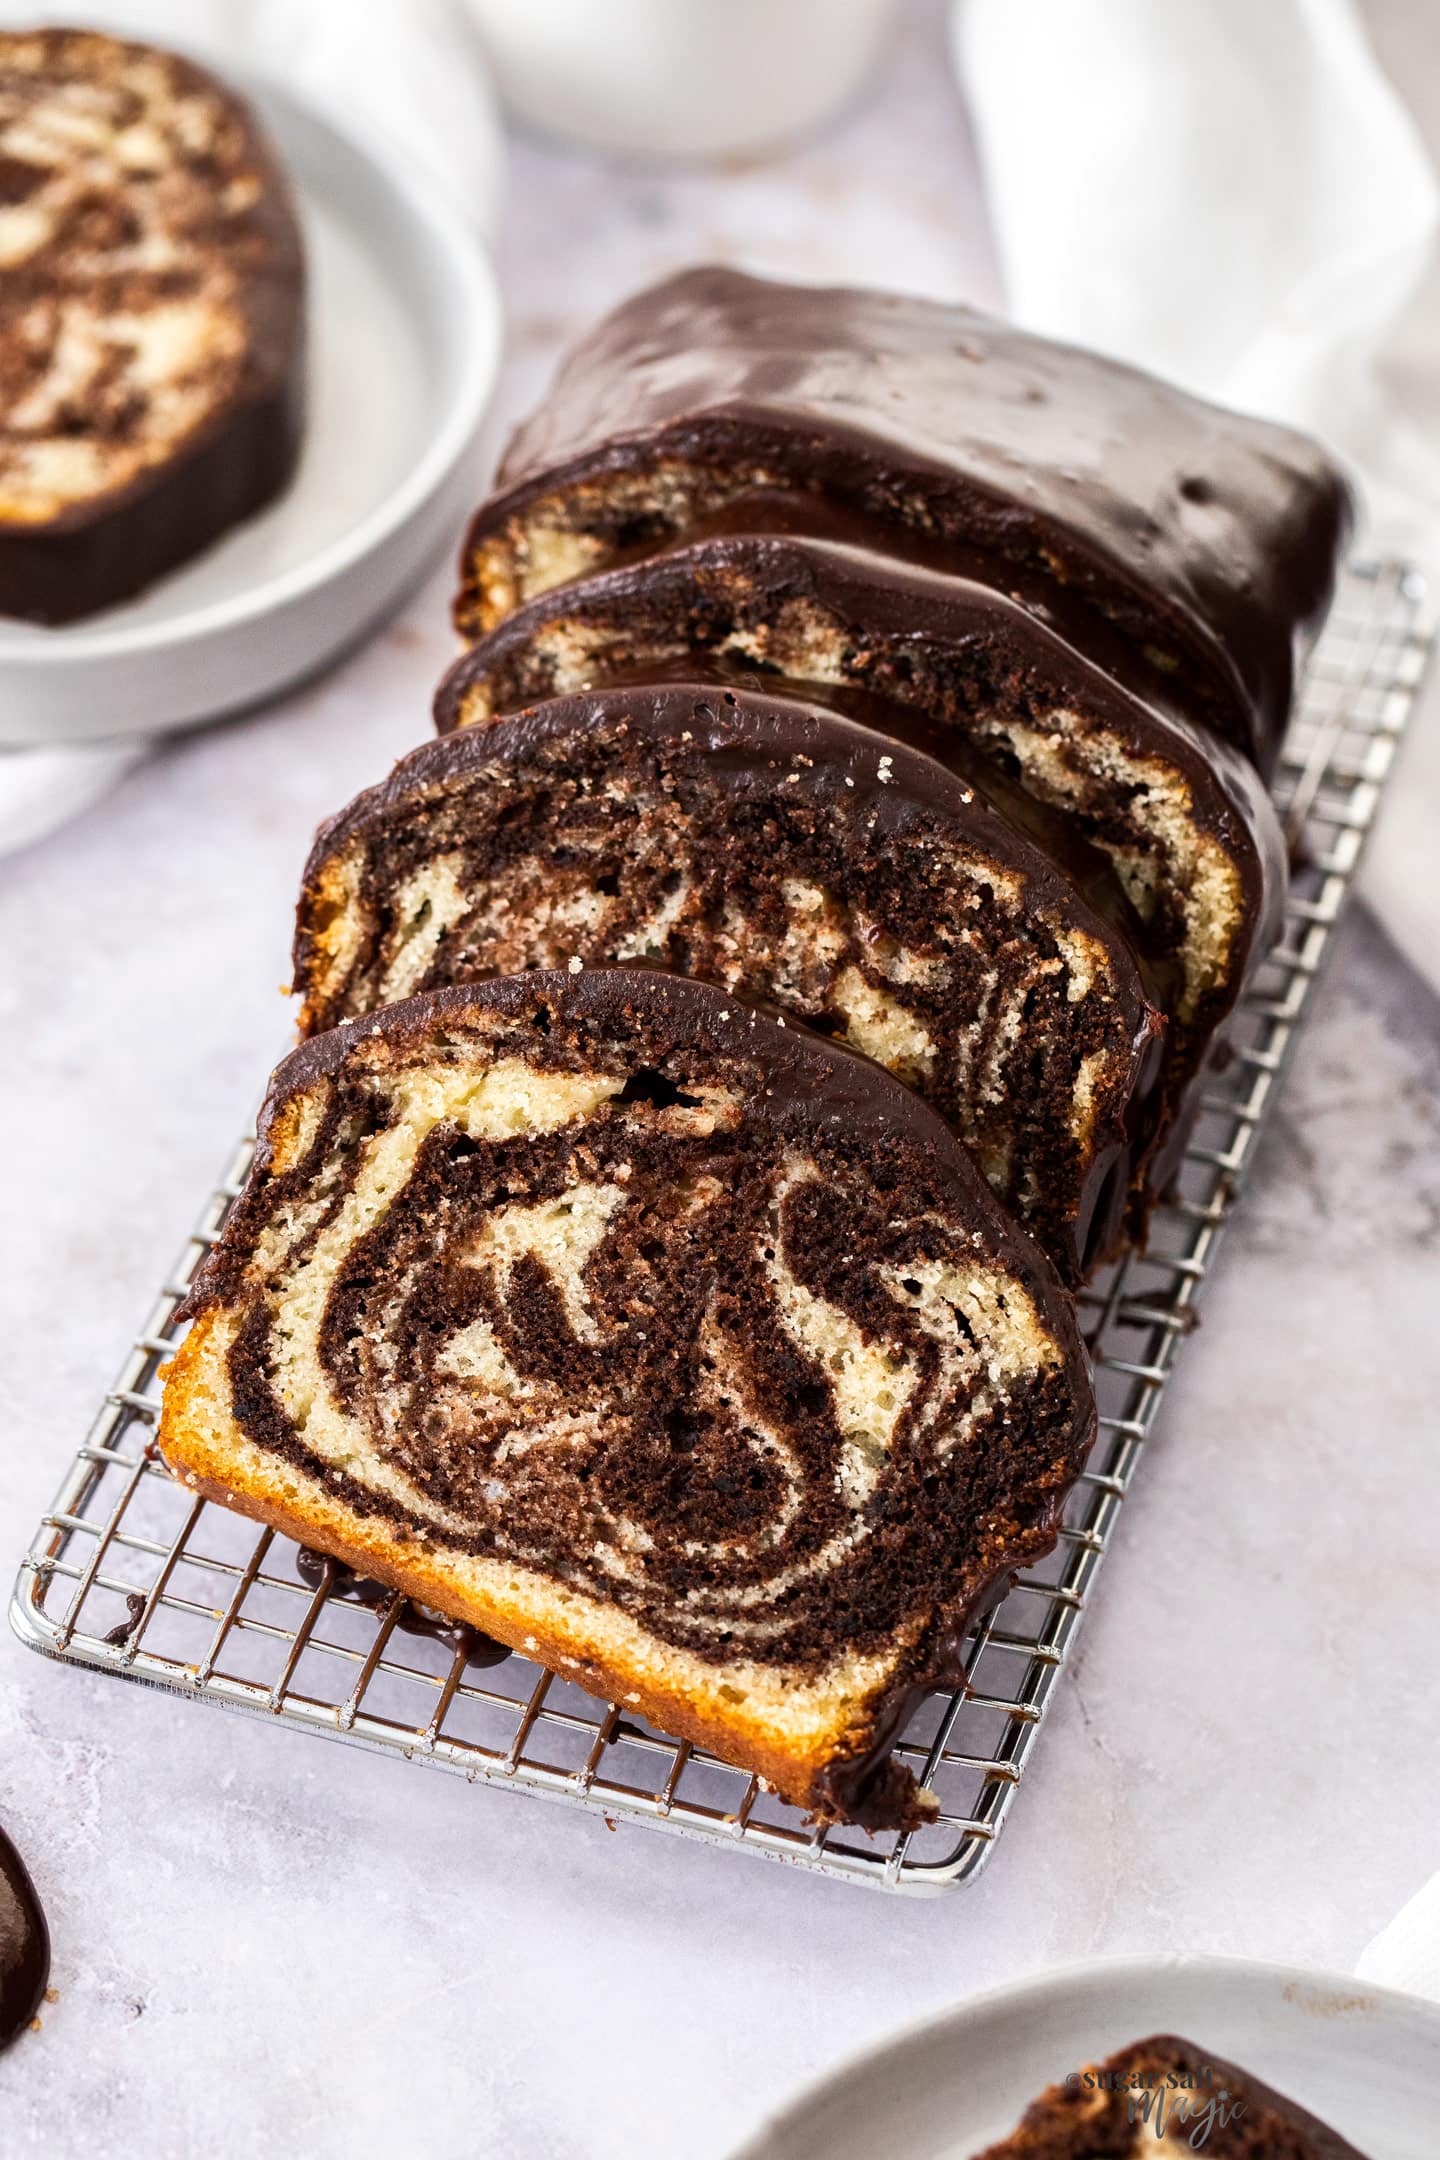 Slices of marble cake on a wire rack.